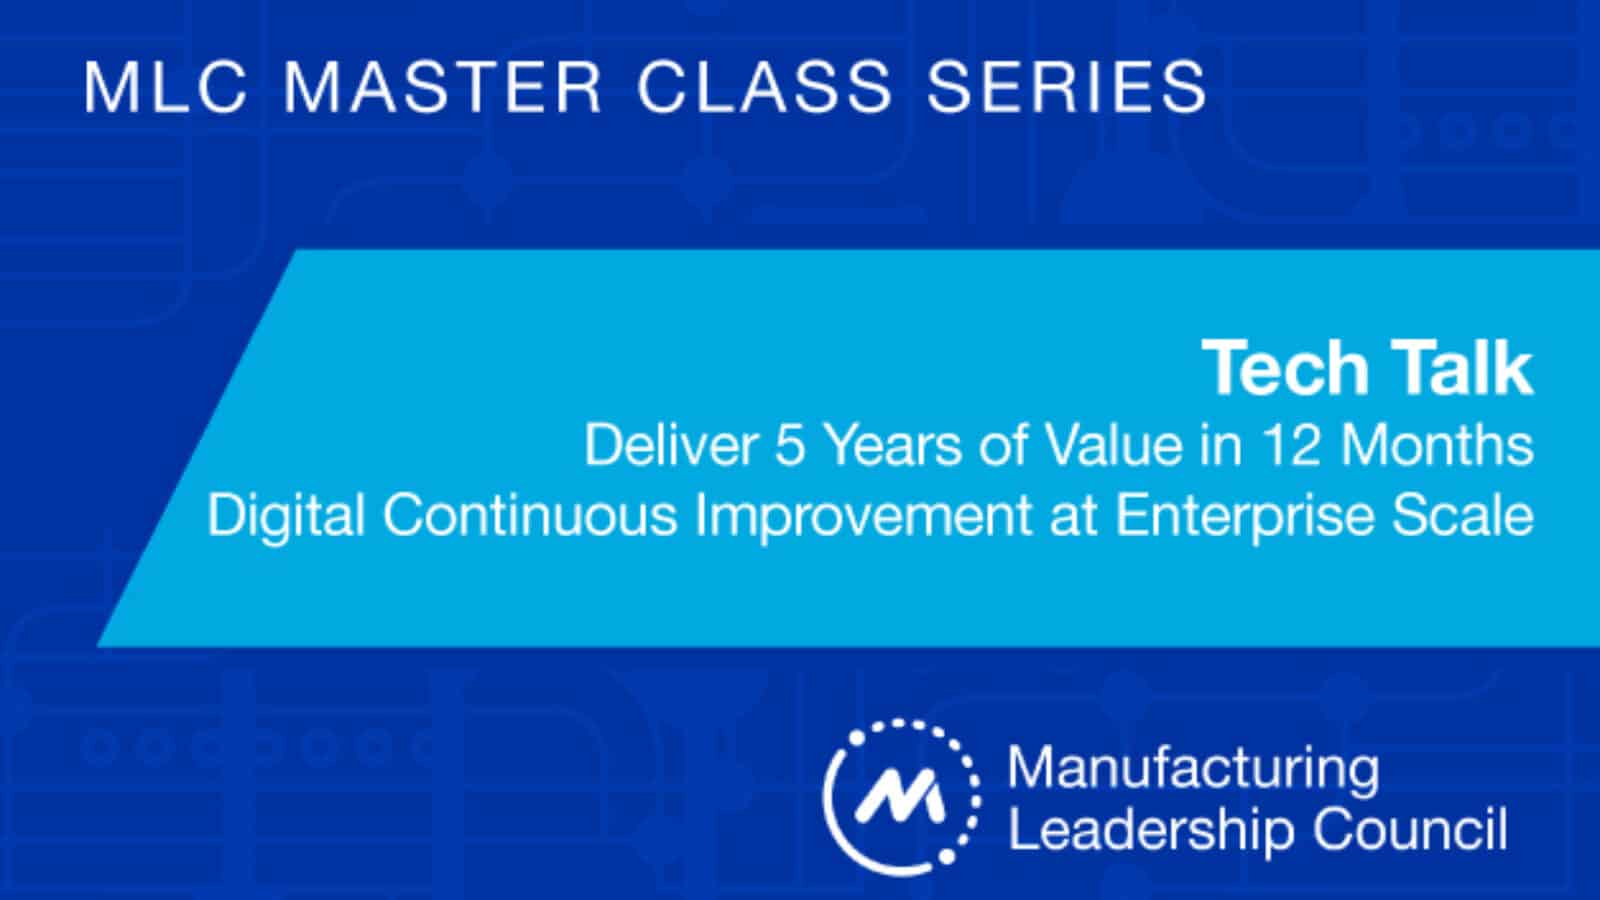 MLC Master Class - Tech Talk: Deliver 5 Years of Value in 12 Months